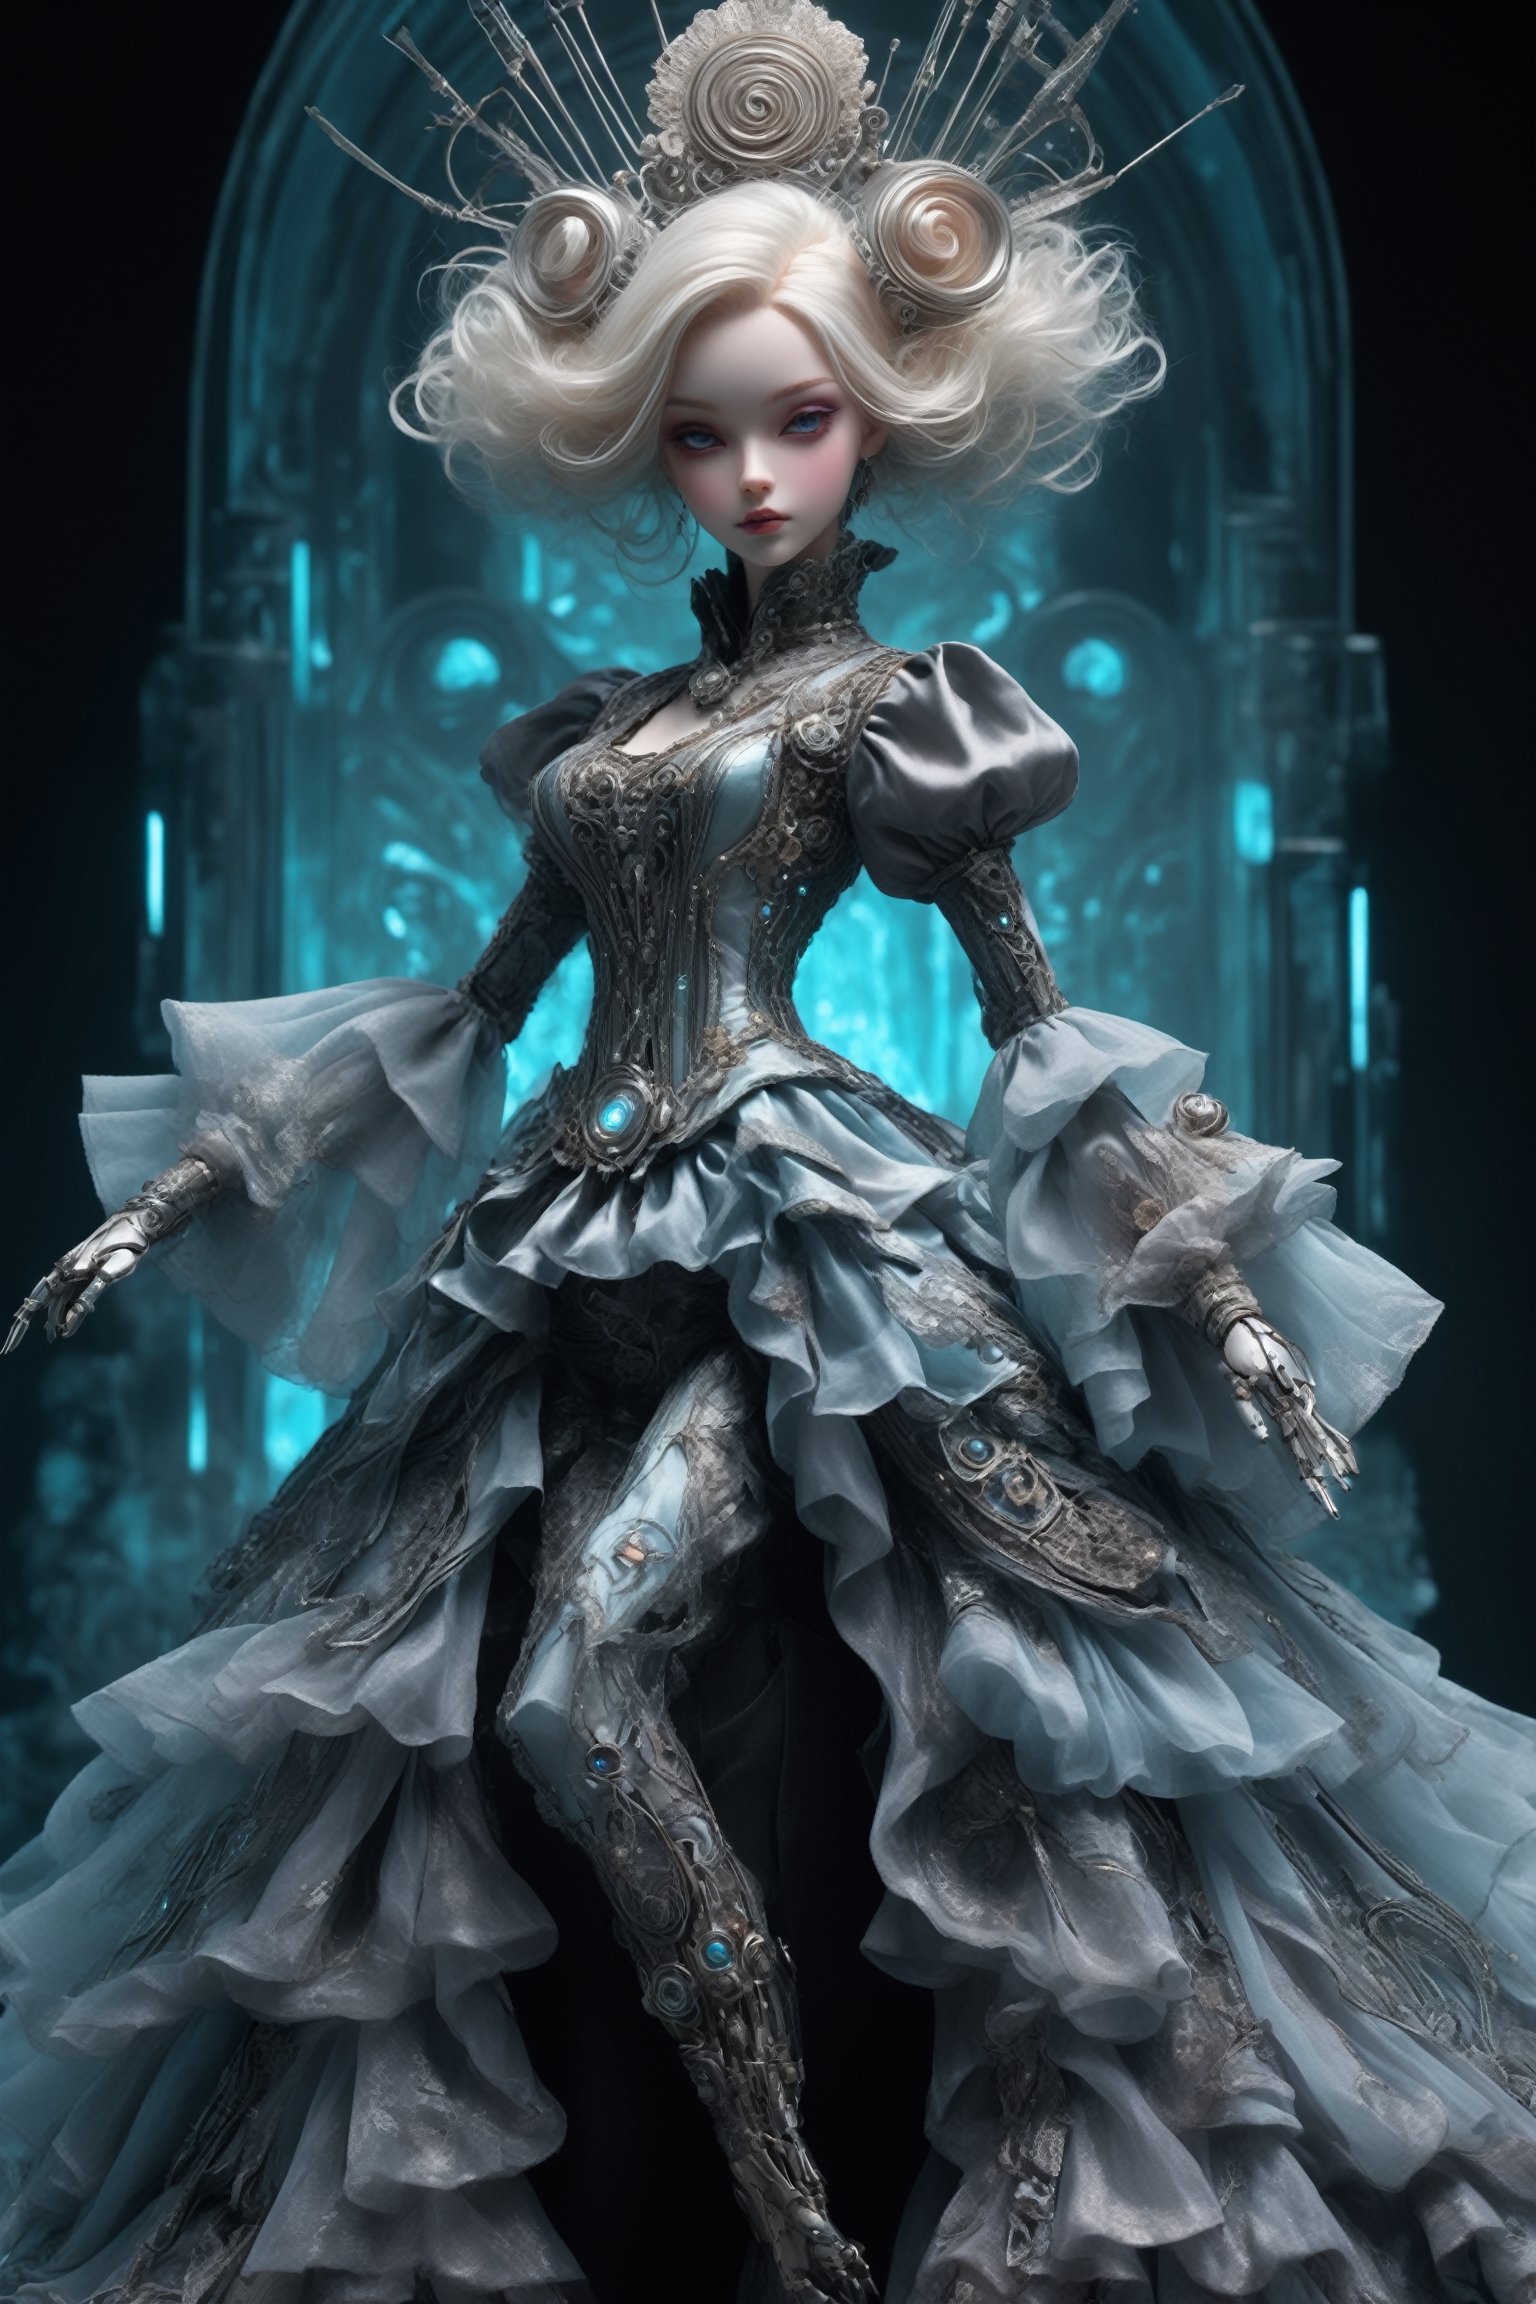 Imagine a ball-jointed doll,dressed in a cyberpunk-inspired Rococo dress. The doll features intricate joints, allowing for lifelike poses. Her dress merges the ornate elegance of Rococo with futuristic cyber elements. The fabric is a mix of rich silks and metallic materials, adorned with elaborate lace and digital patterns that glow subtly. The bodice is detailed with delicate ruffles and cybernetic embellishments, while the skirt flares out in layers, combining traditional Rococo volume with sleek, modern lines. Her hair is styled in a powdered wig, interwoven with fiber optic strands, ,d1p5comp_style